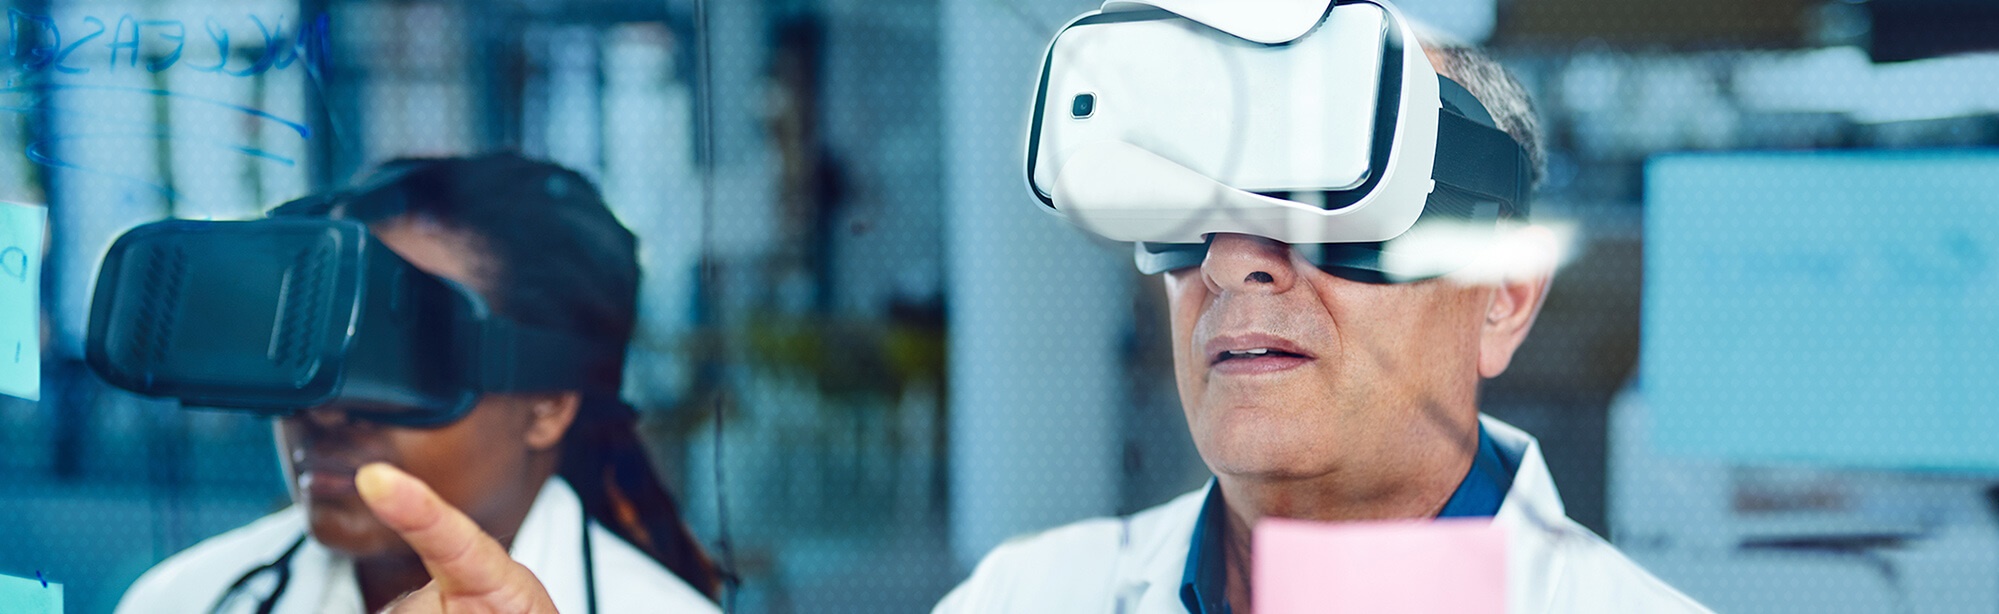 healthcare professionals using virtual reality headset